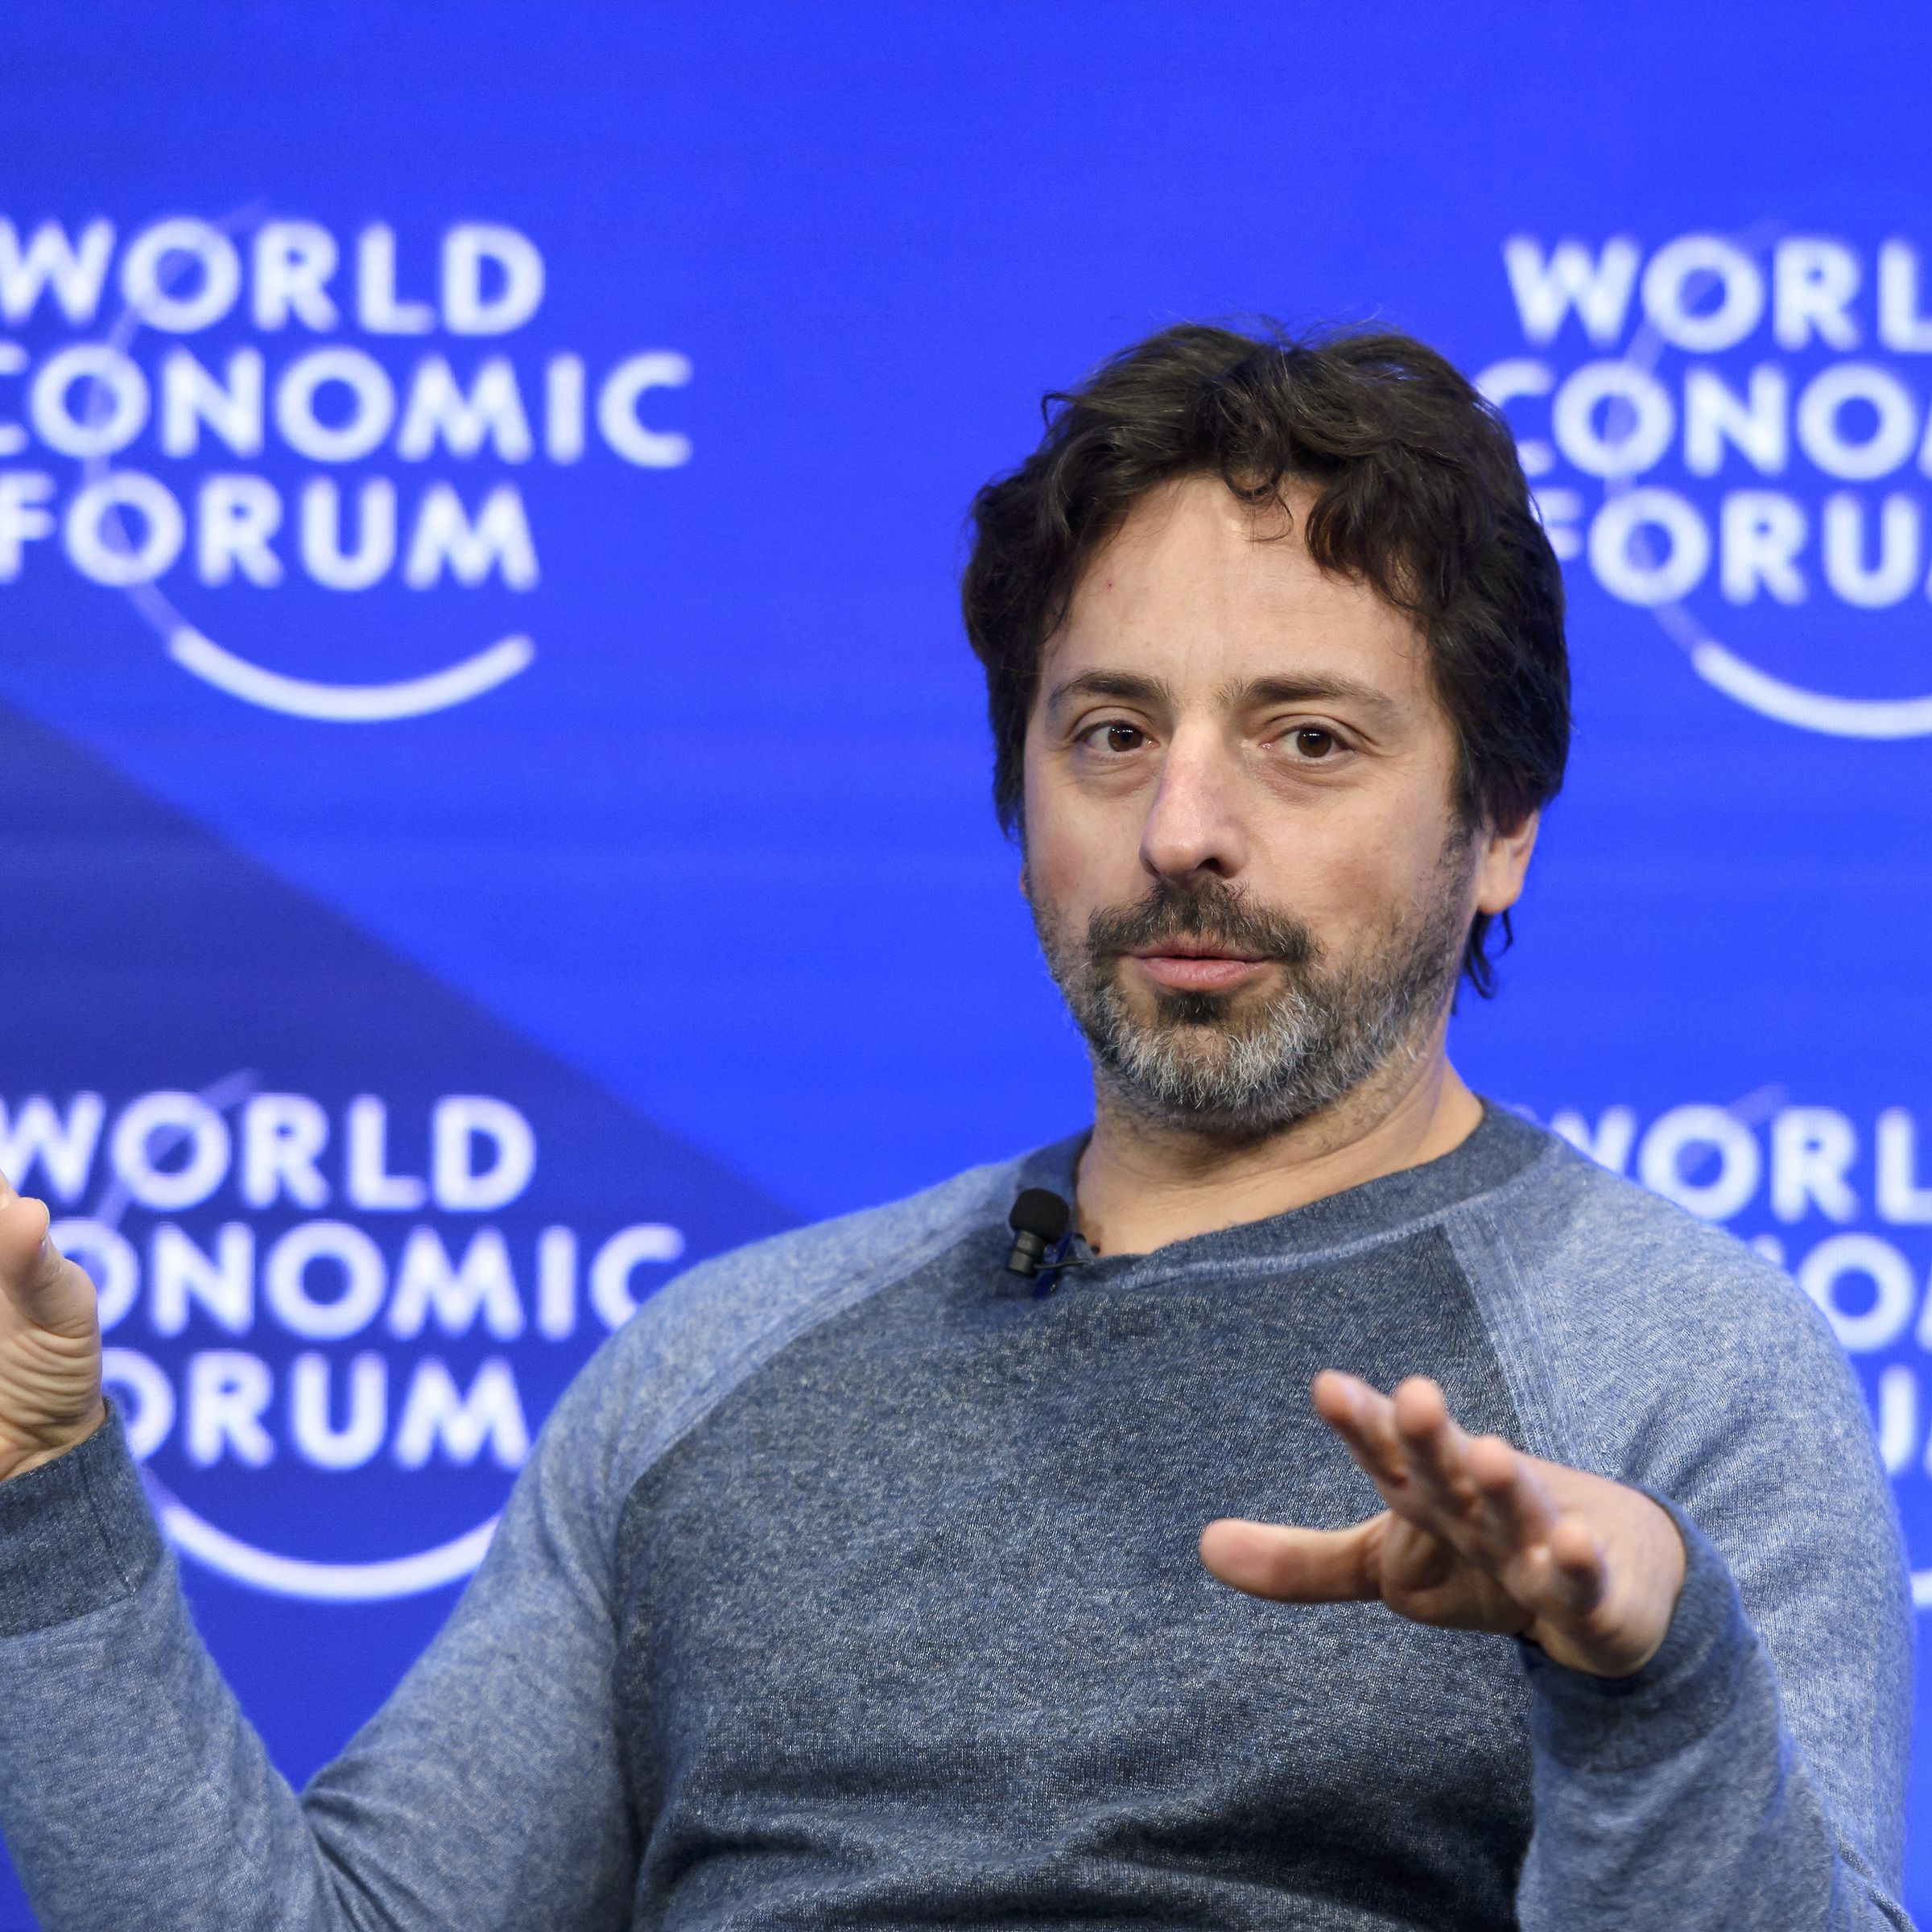 A picture of Sergey Brin holding his hands up mid-gesture while speaking at the World Economic Forum.